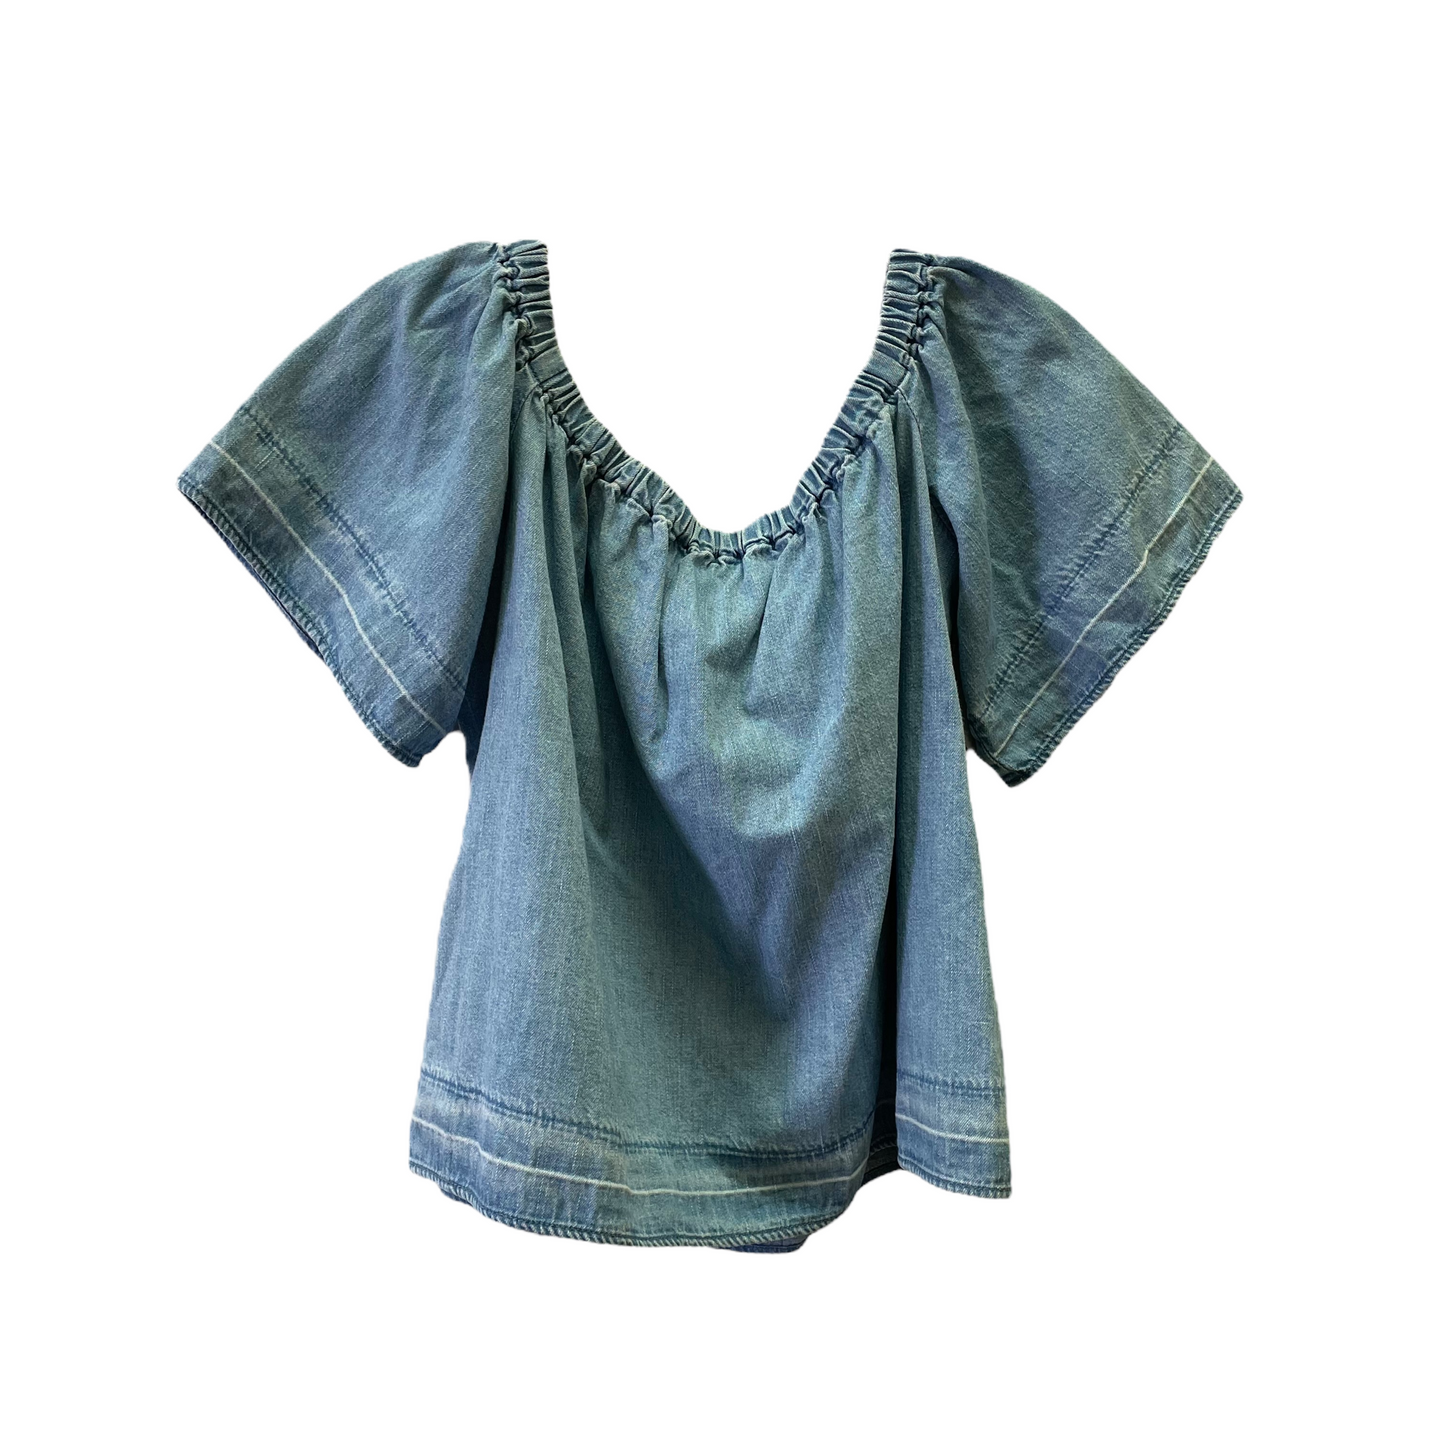 Blue Top Short Sleeve By Adriano Goldschmied, Size: M